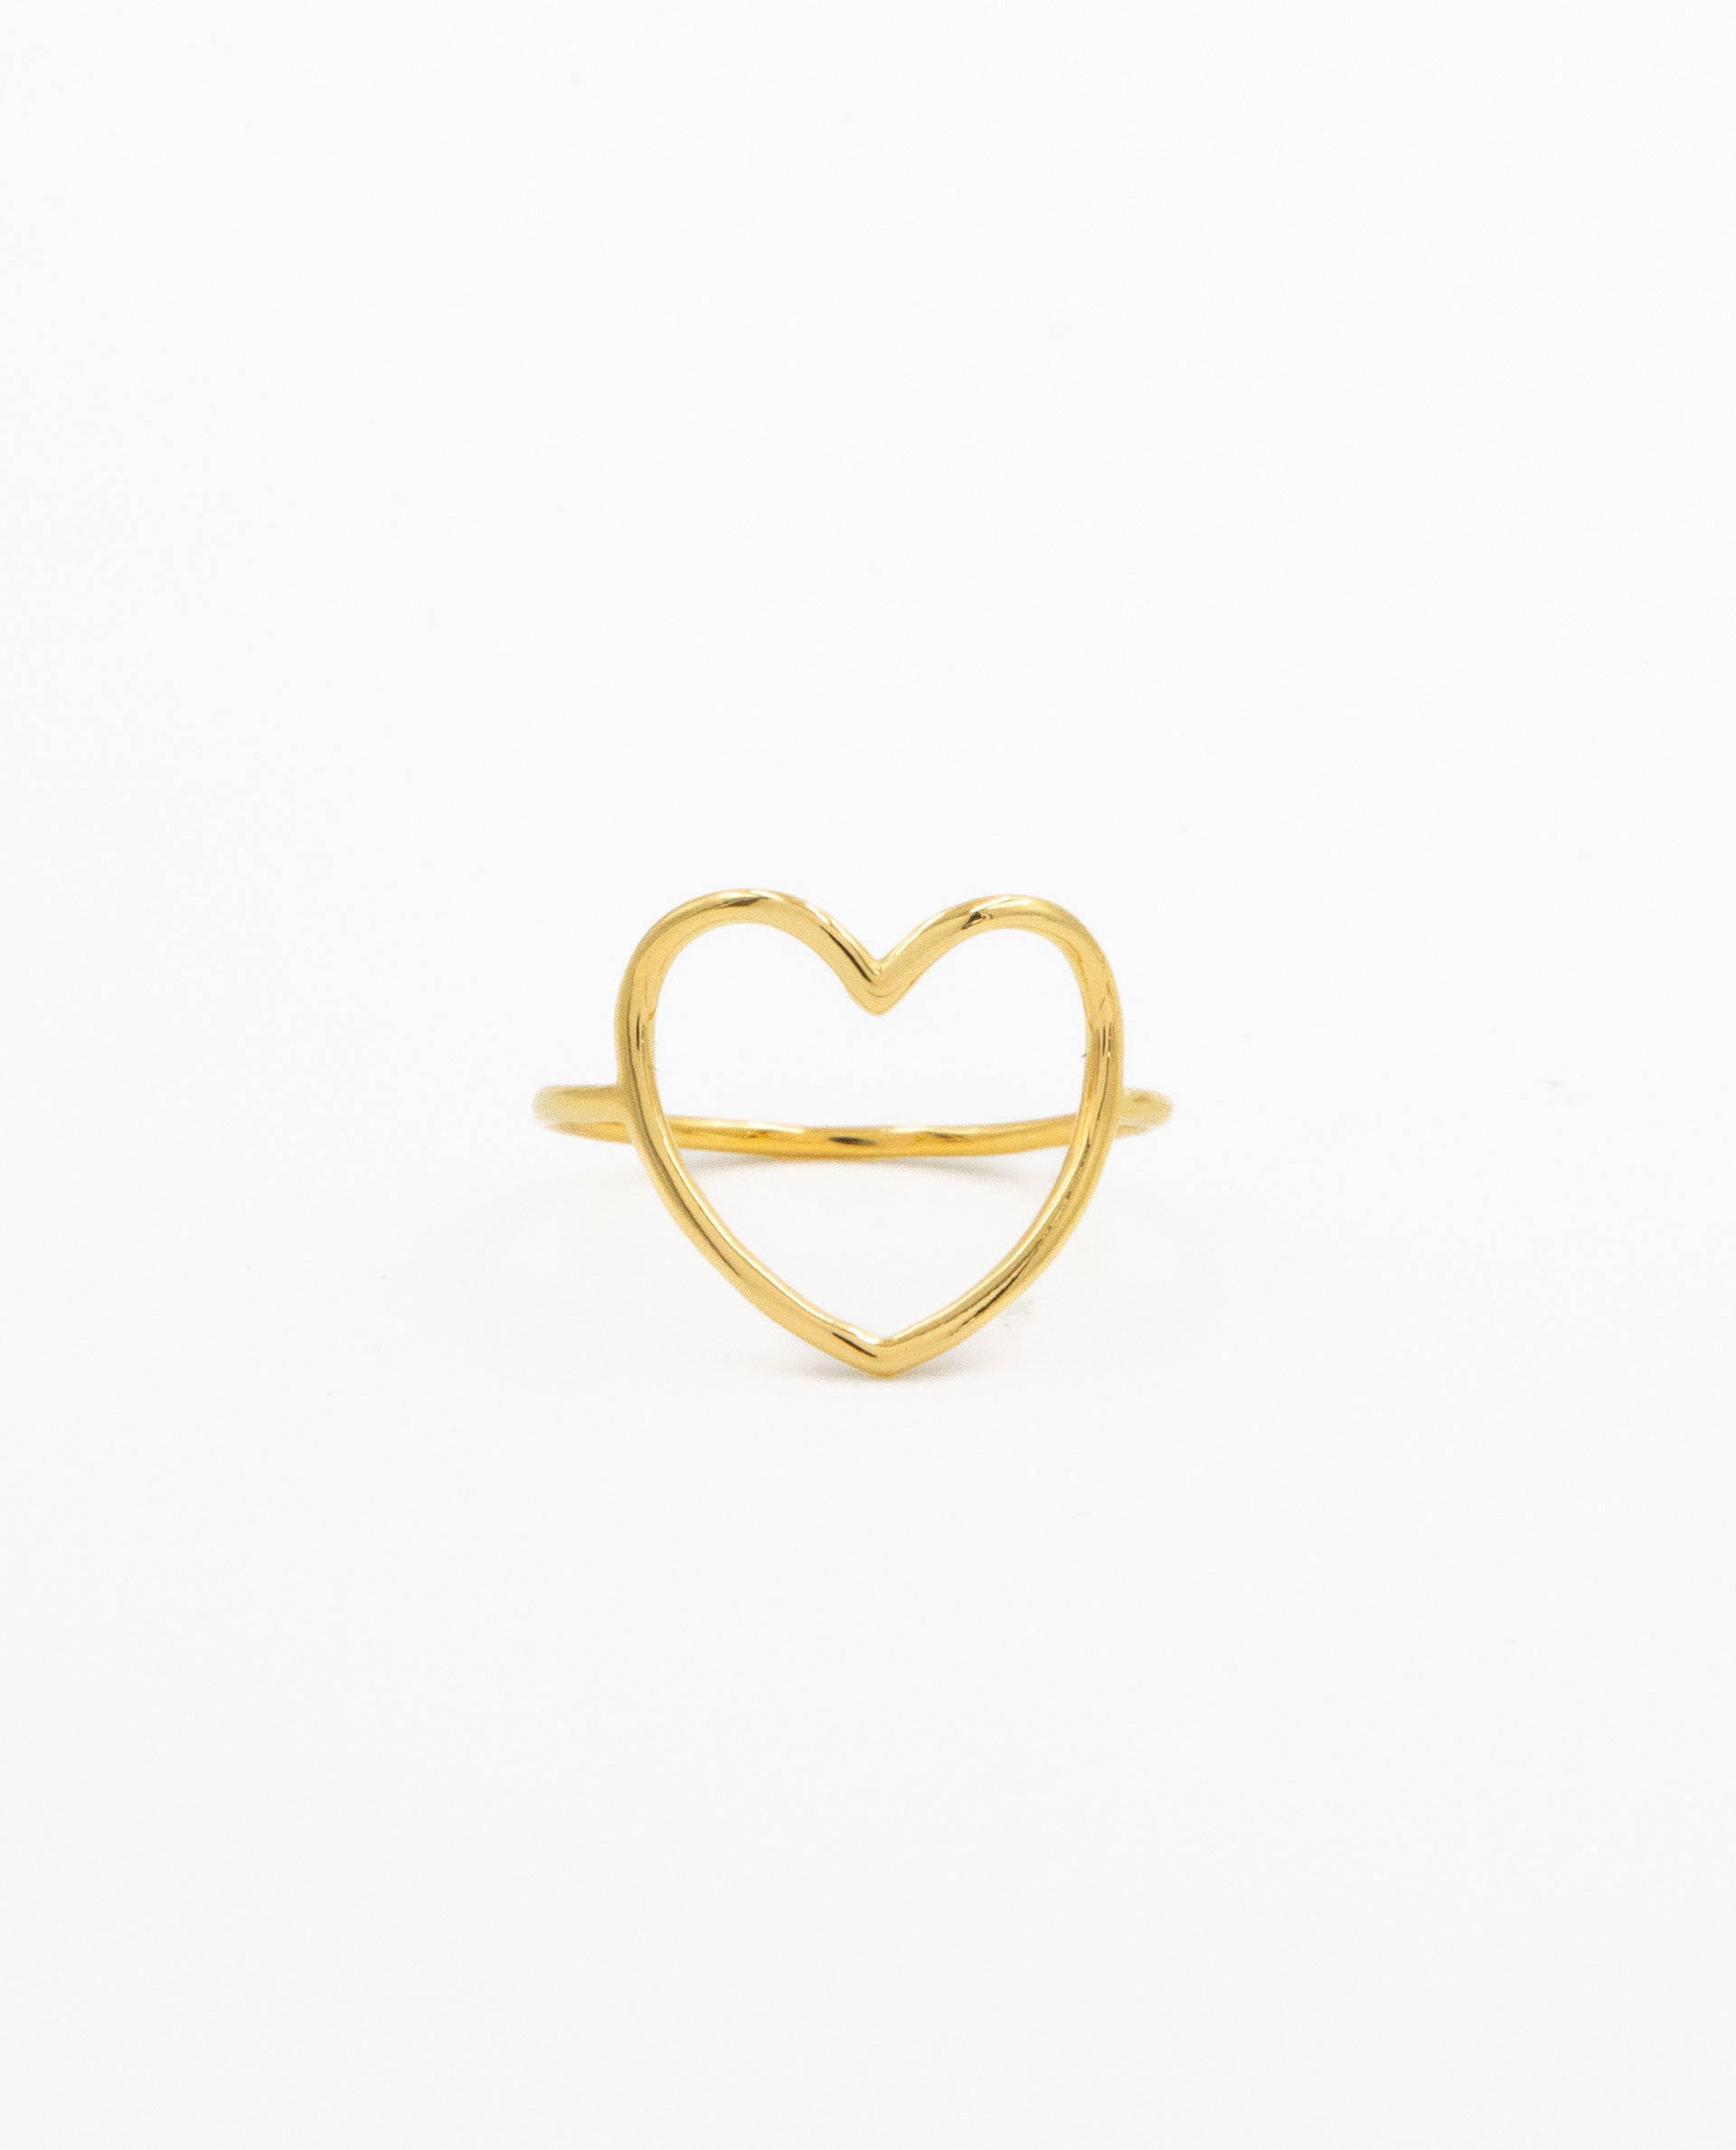 DAILY LOVE RING - GOLD PLATED SILVER